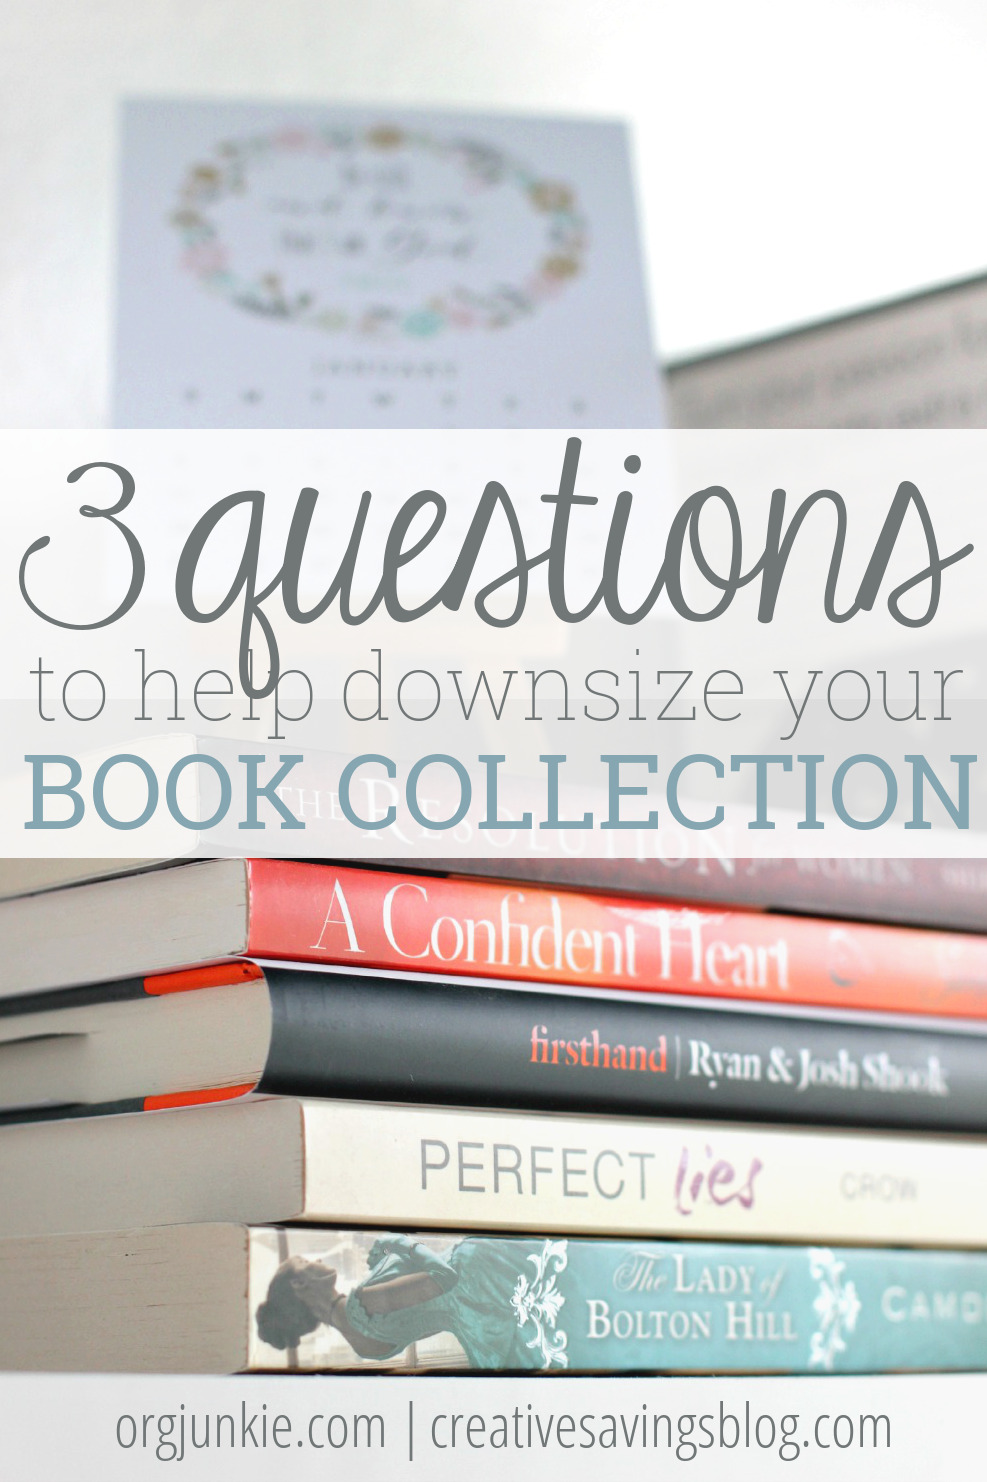 Love to collect books, but tired of the piles and clutter they create in your home? These 3 questions will help organize AND downsize your book collection, without sacrificing quality reads!